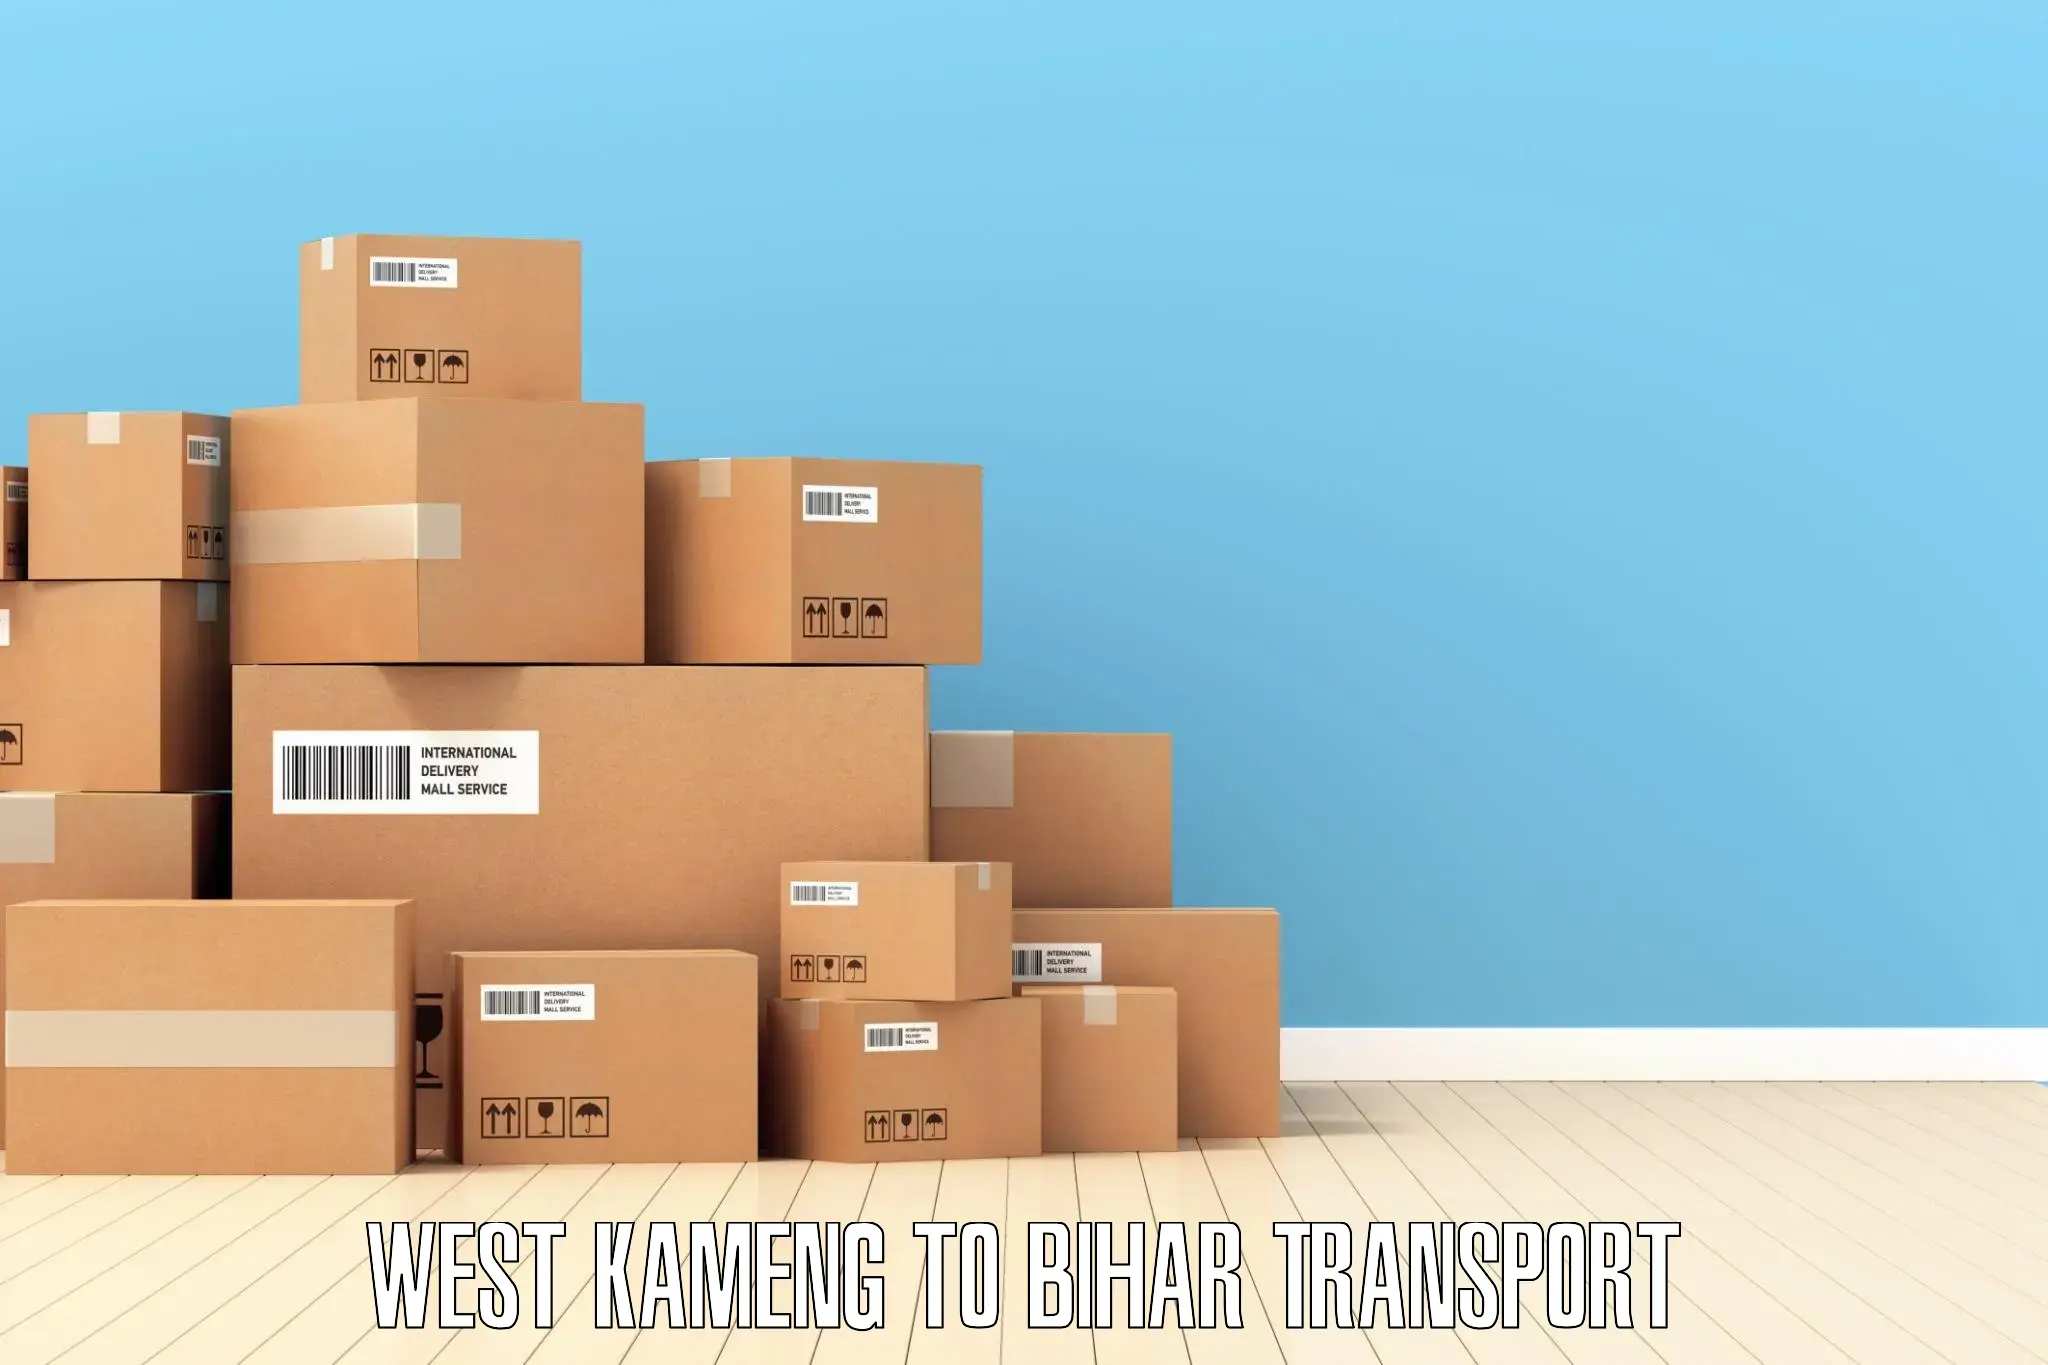 Nearby transport service West Kameng to Chainpur